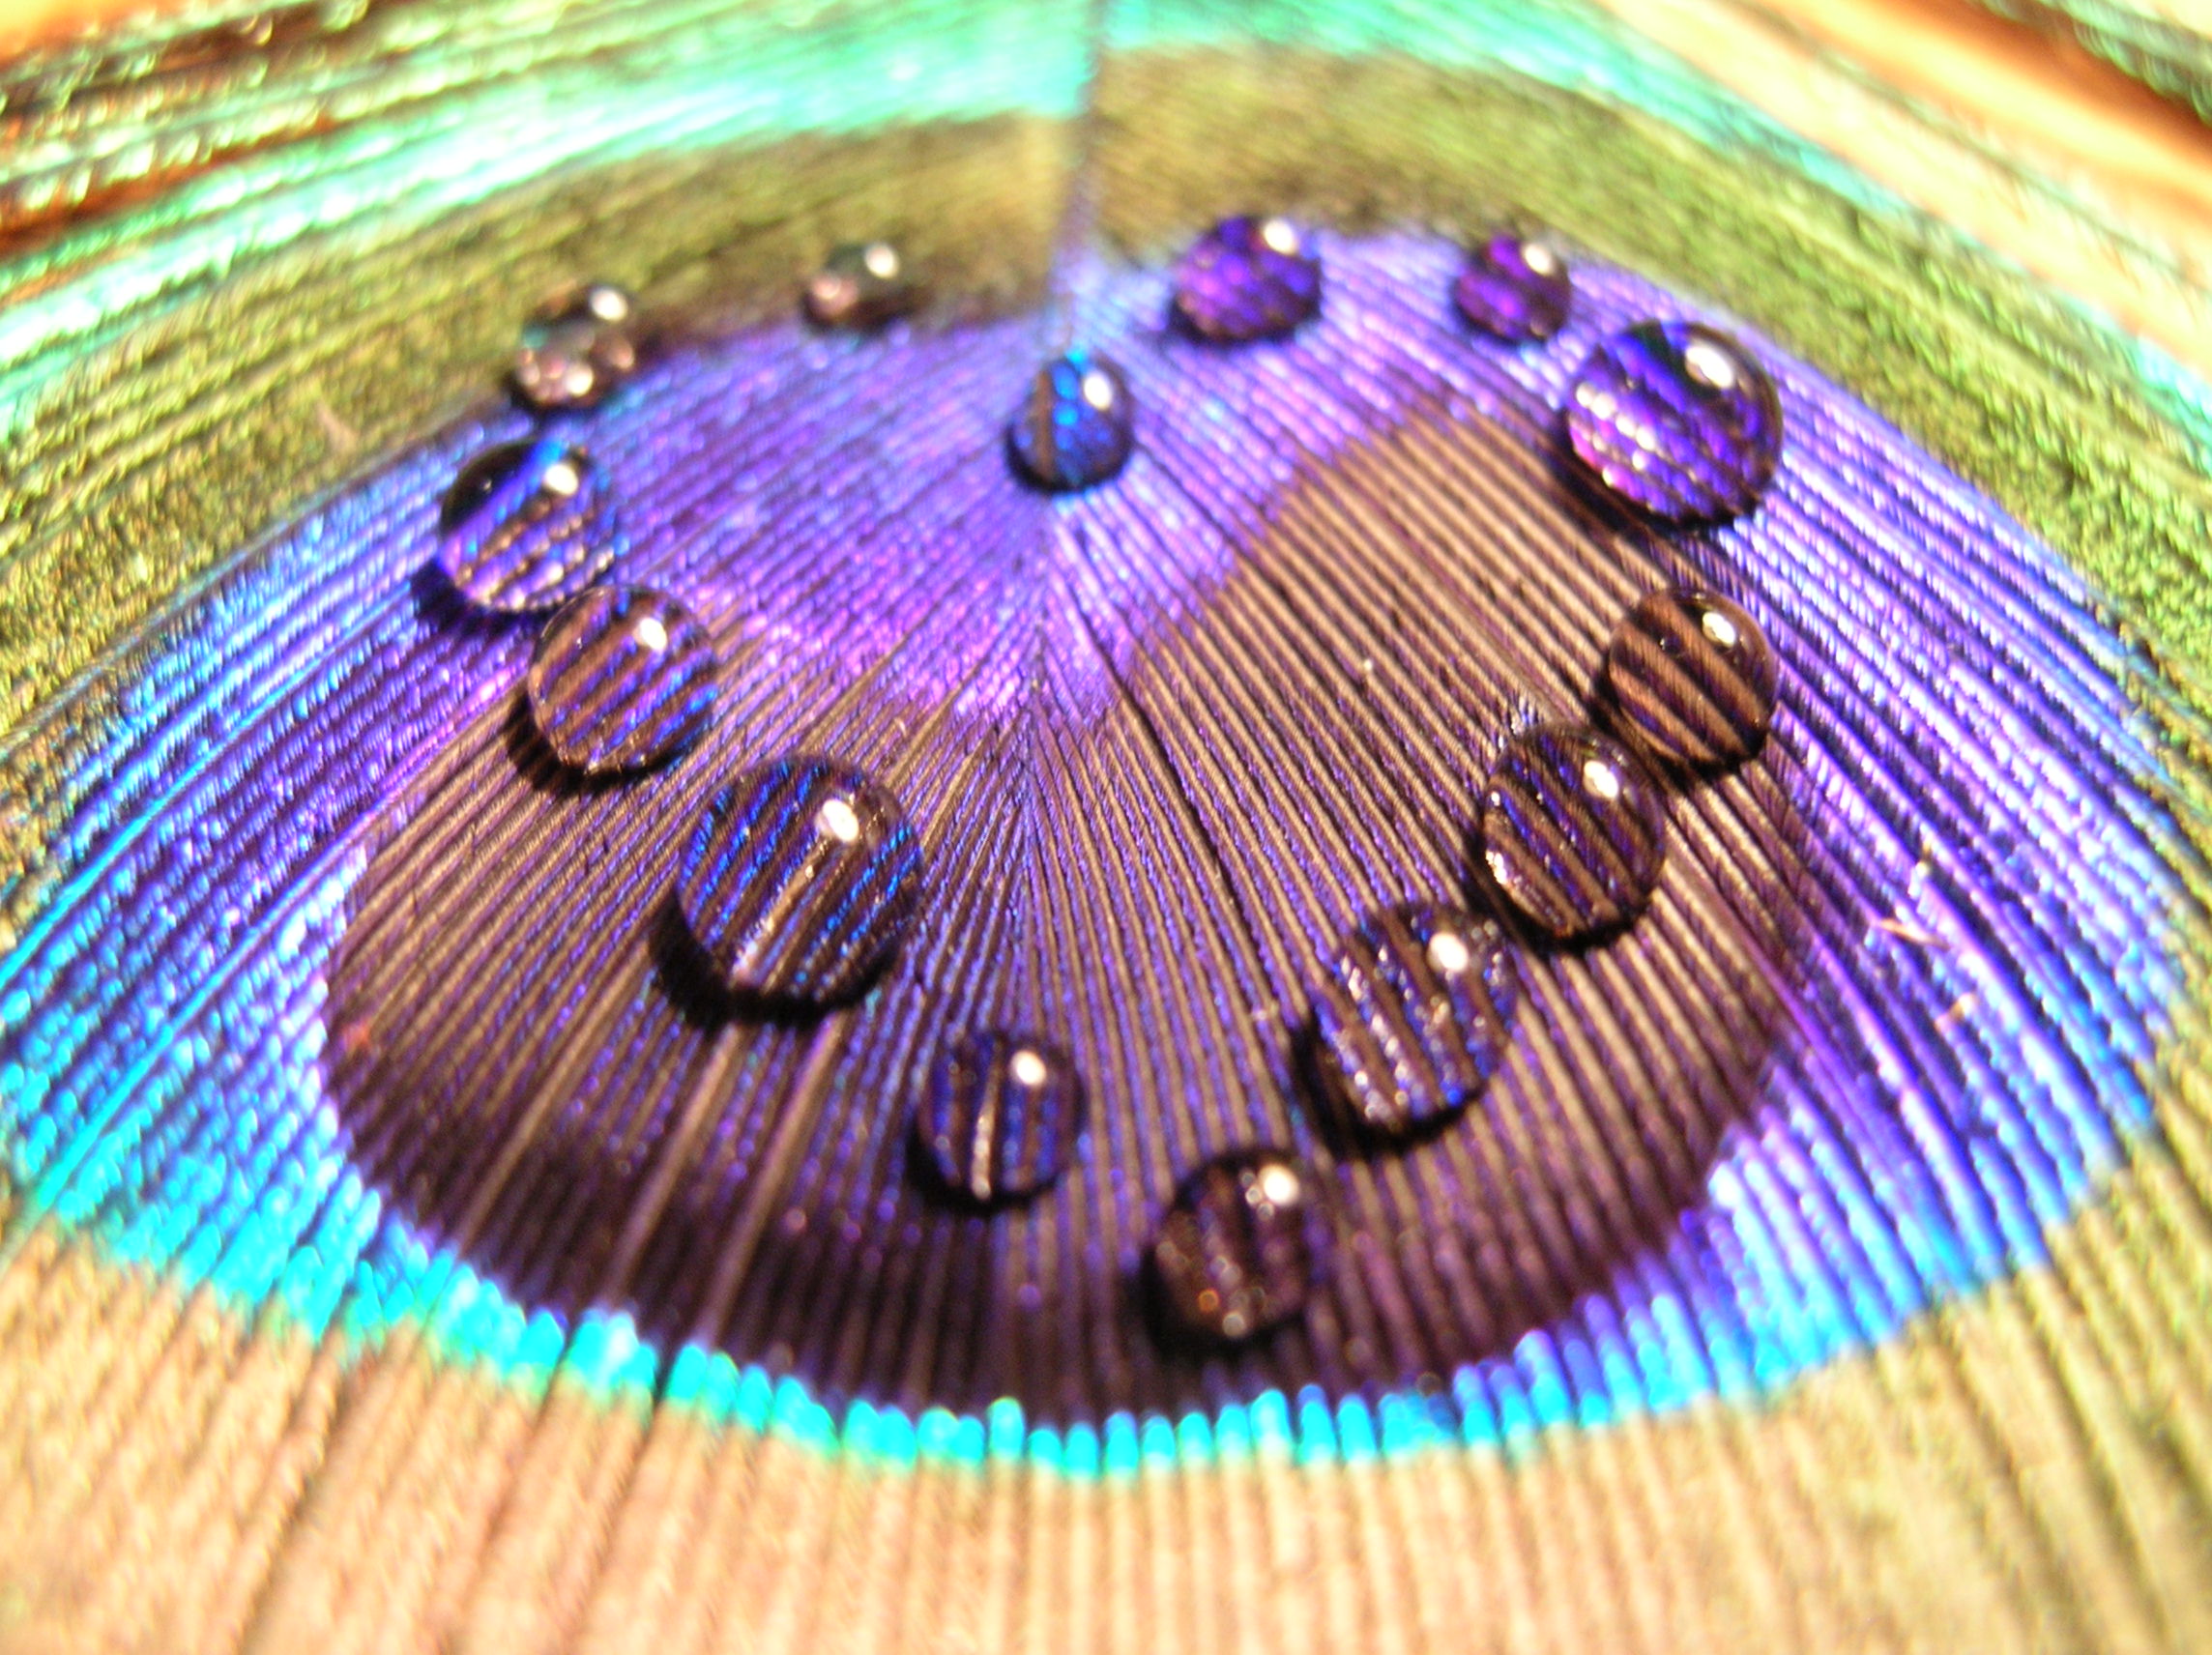 Heart-shaped water droplet on a feather with violet, blue, and brown hues. A symbol of love and artistic beauty.